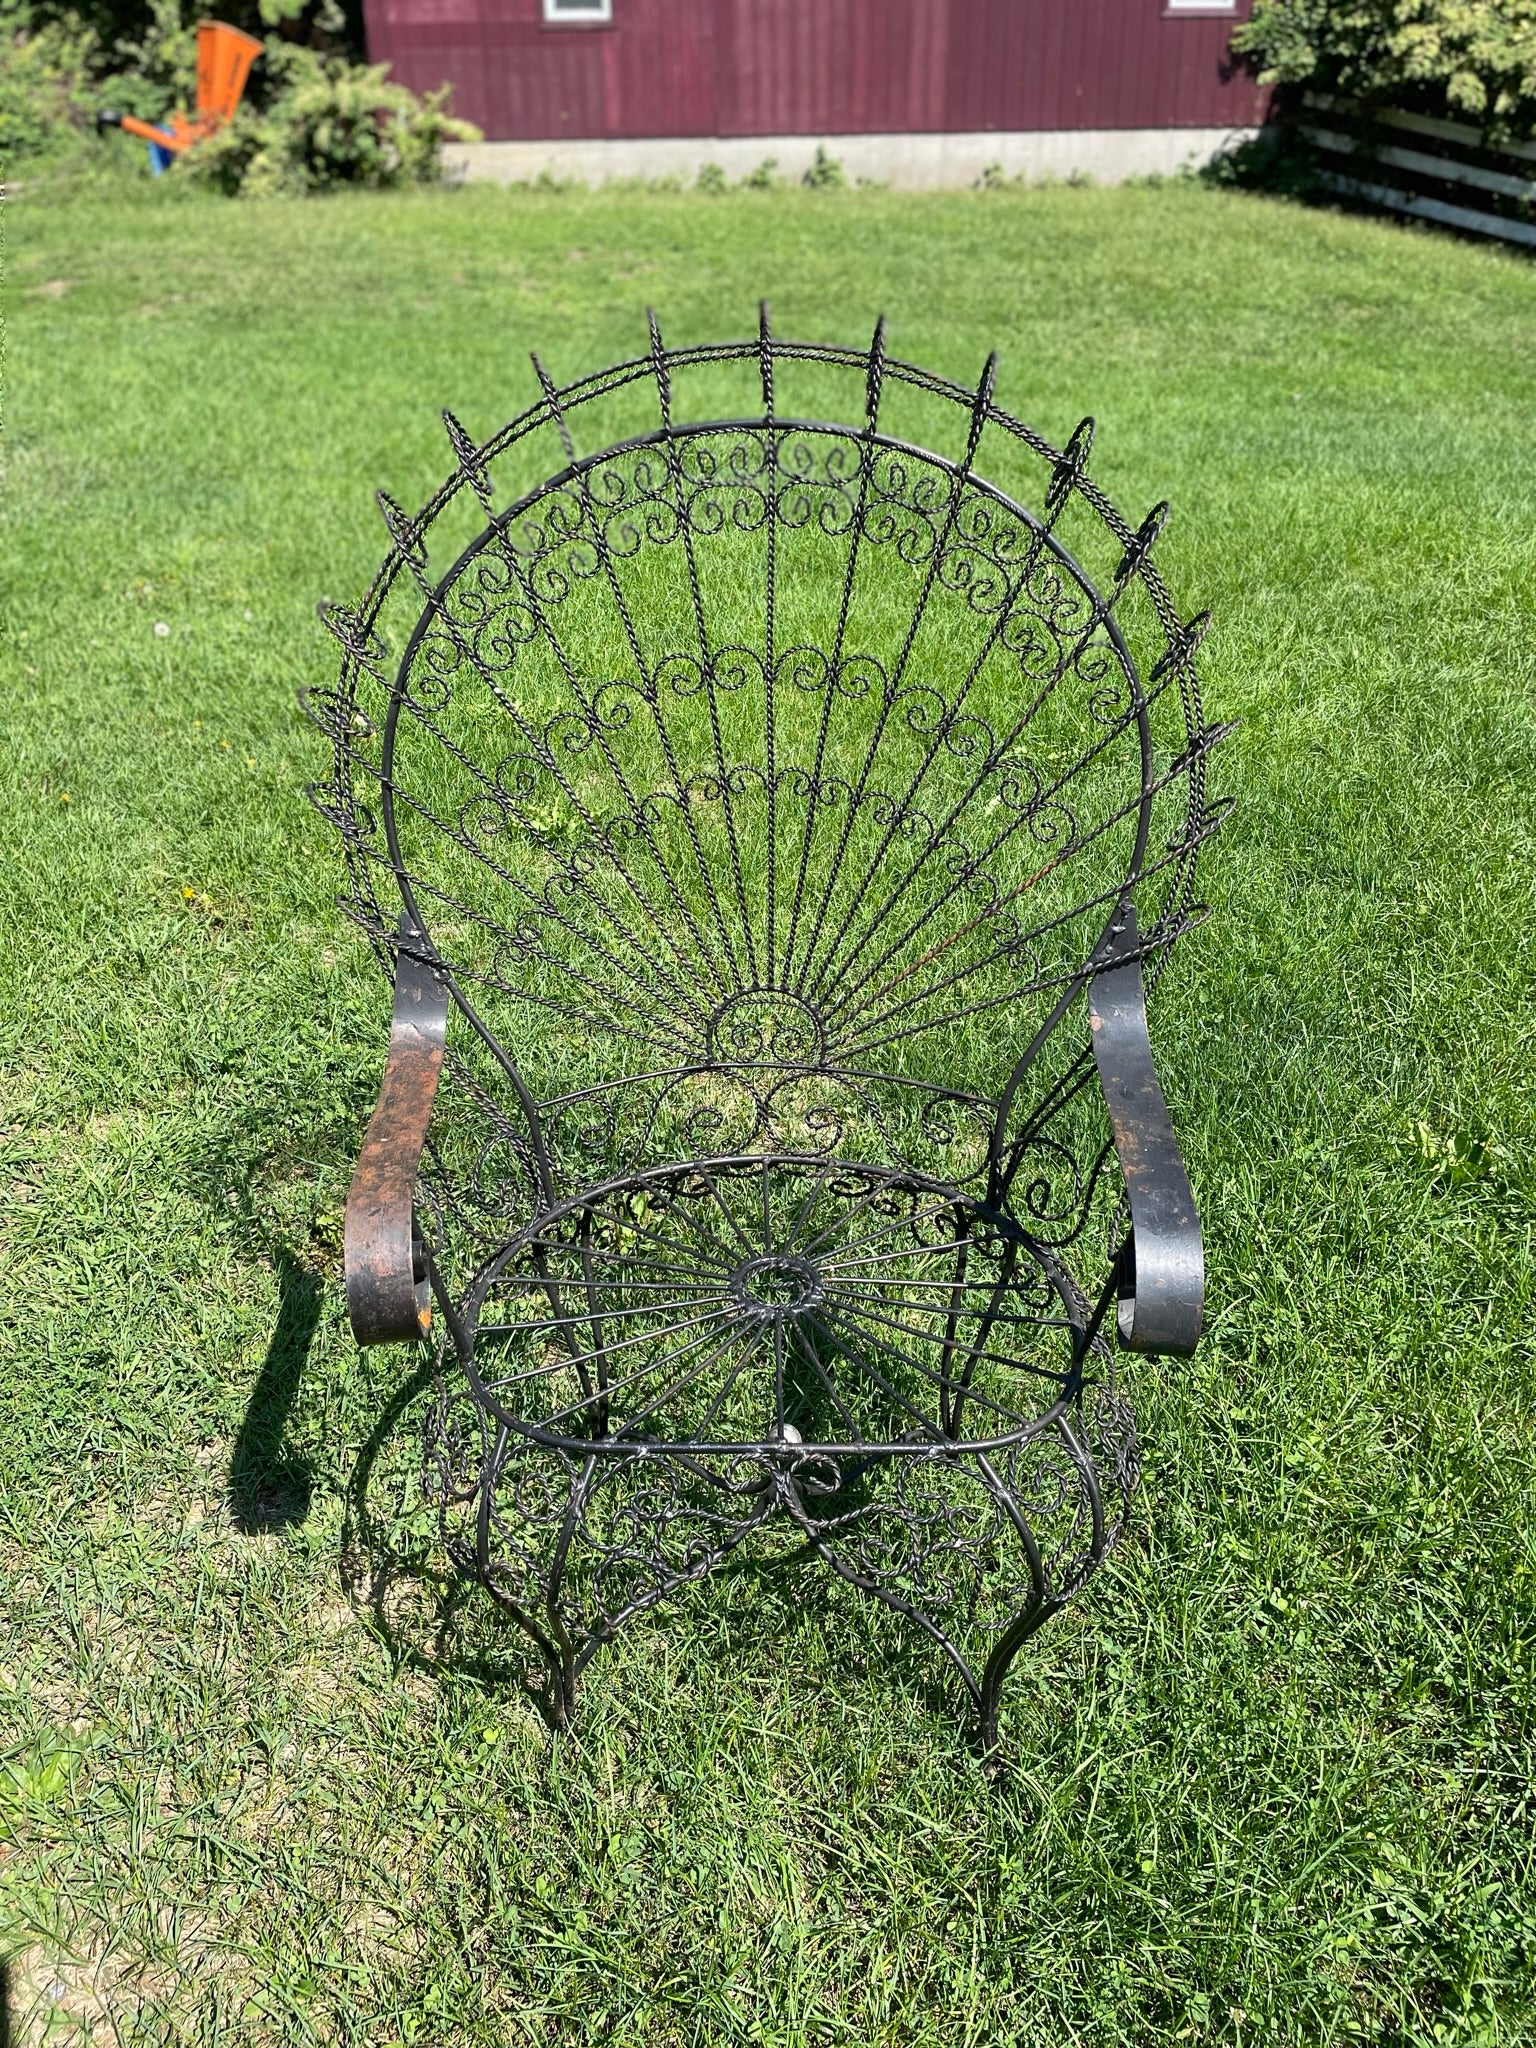 A pair of vintage salterini peacock chairs
In stock and ready to ship
Gorgeous set of twisted iron fan back peacock chairs by Salterini. Perfect for any deck, garden, or patio. Can be sandblasted and powdercoated to offer years of protection of your